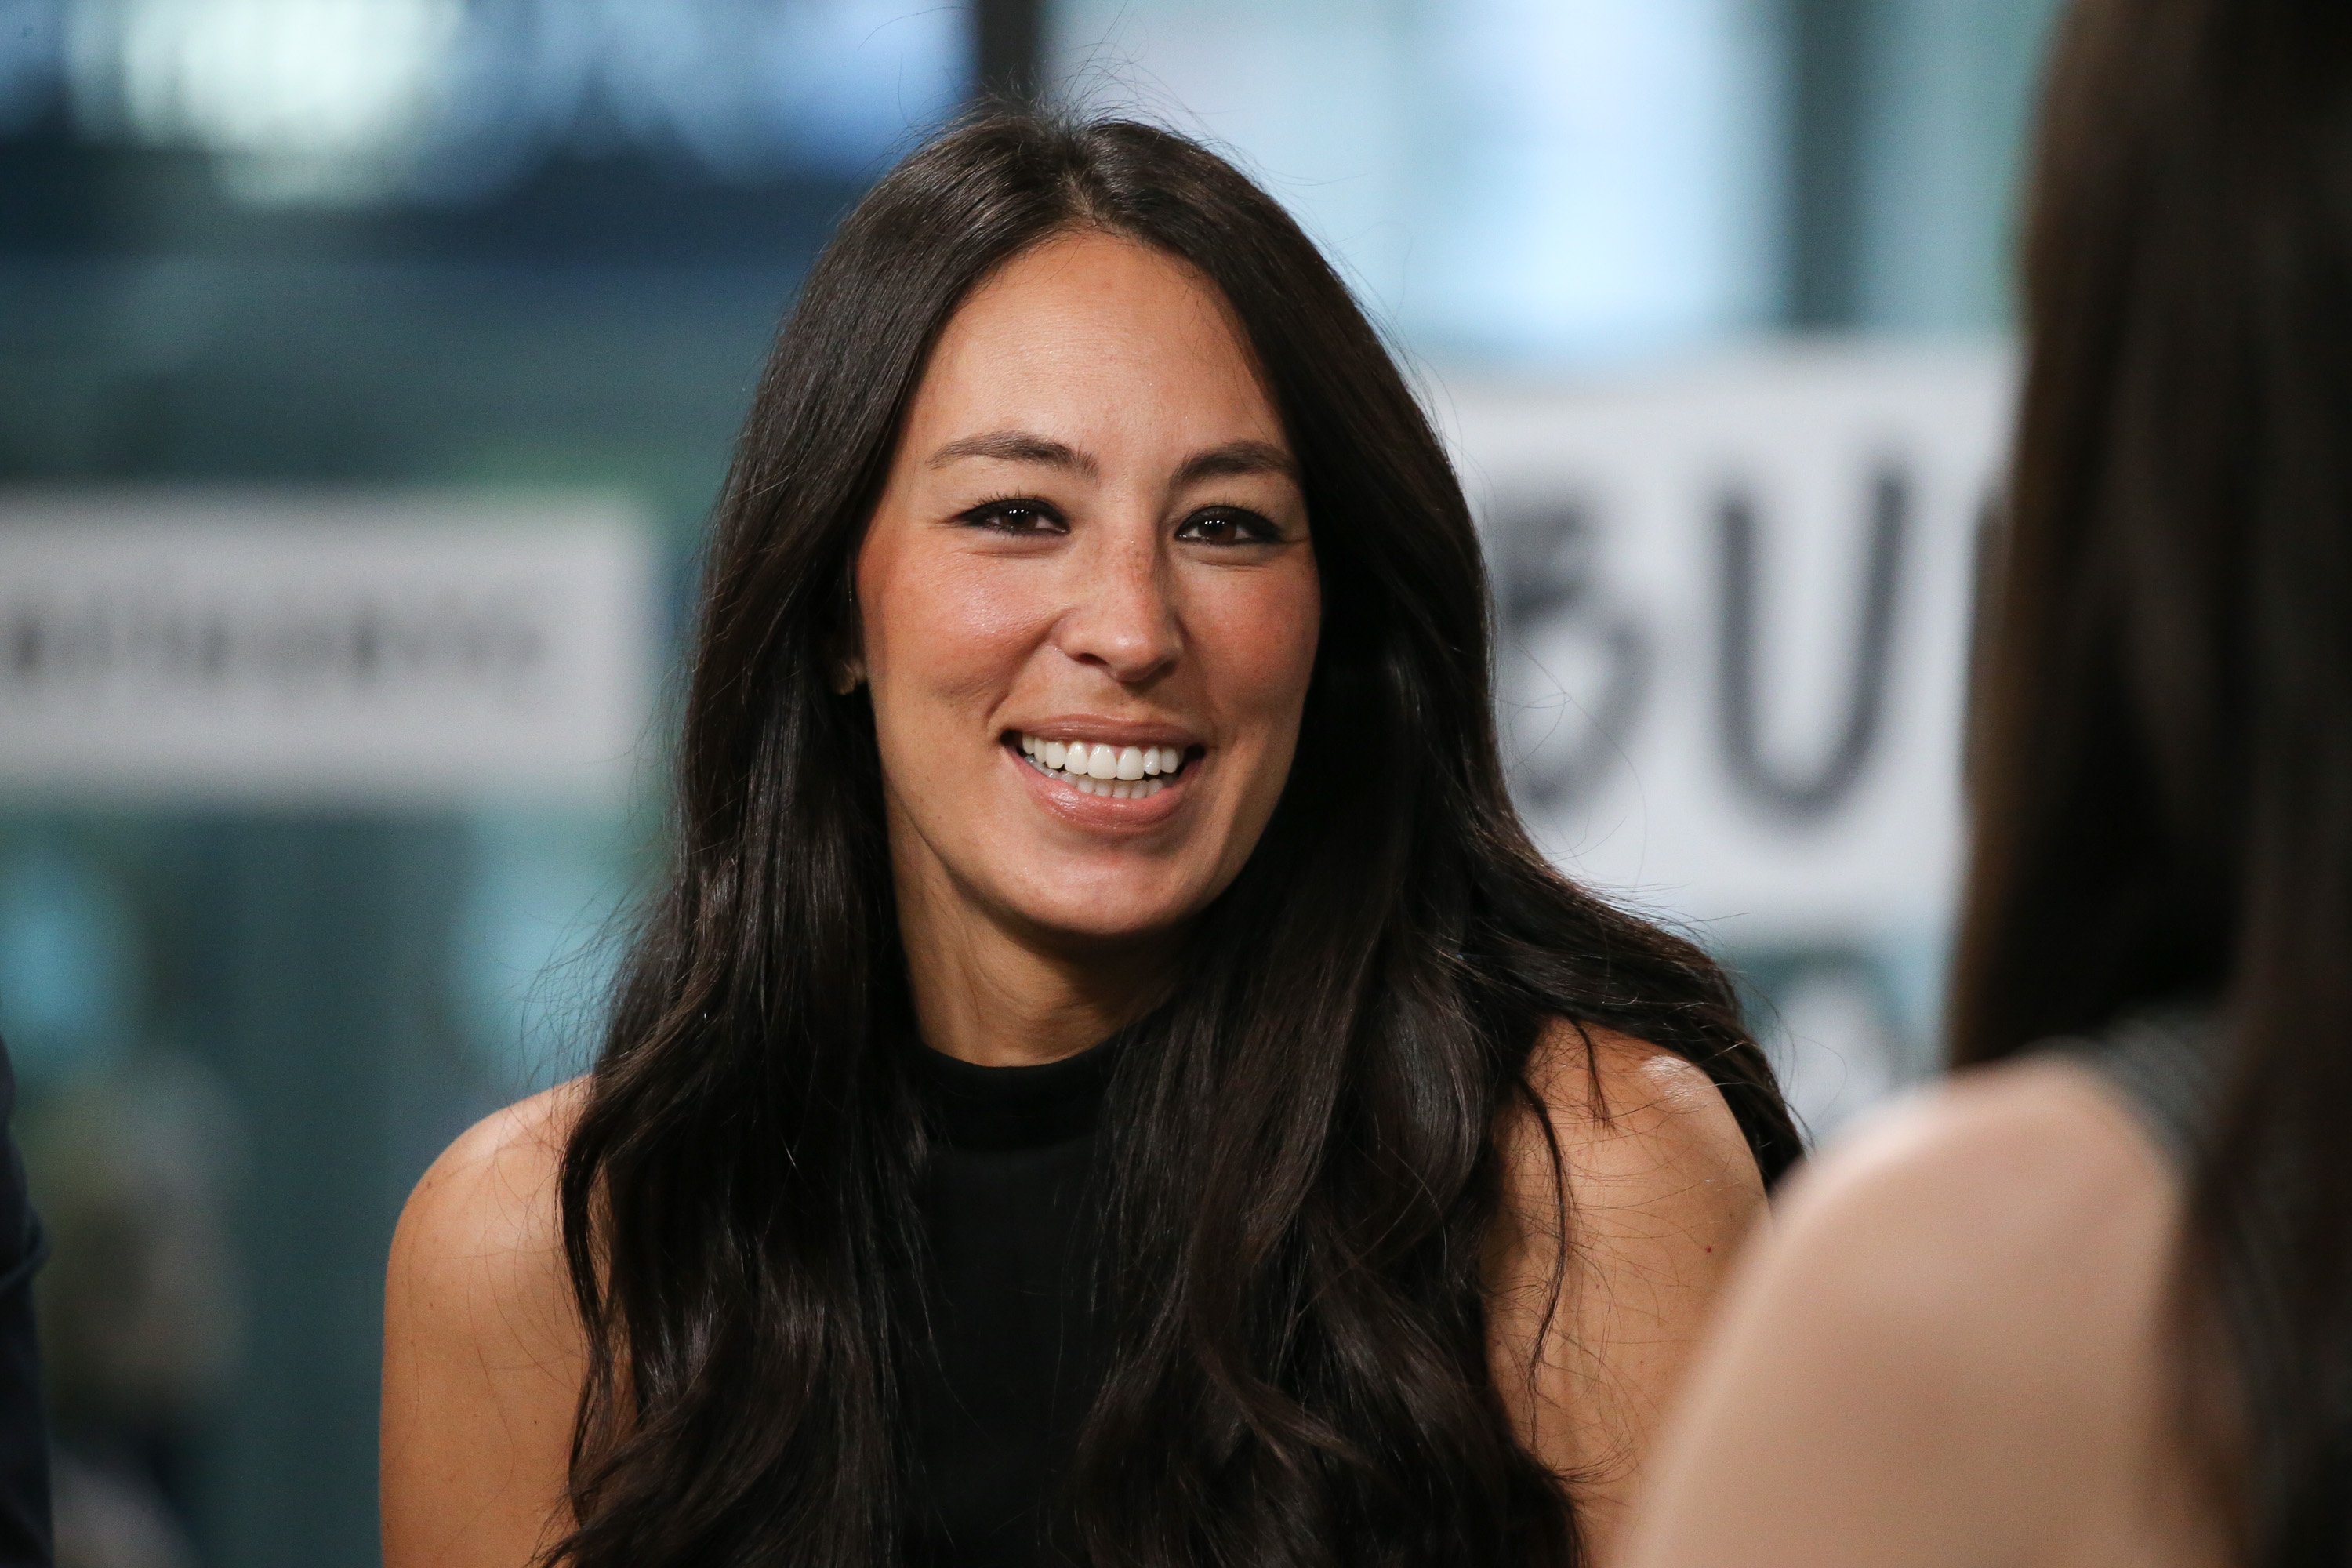 Joanna Gaines discusses new book, "Capital Gaines: Smart Things I Learned Doing Stupid Stuff" at Build Studio on October 18, 2017 in New York City  | Photo: GettyImages